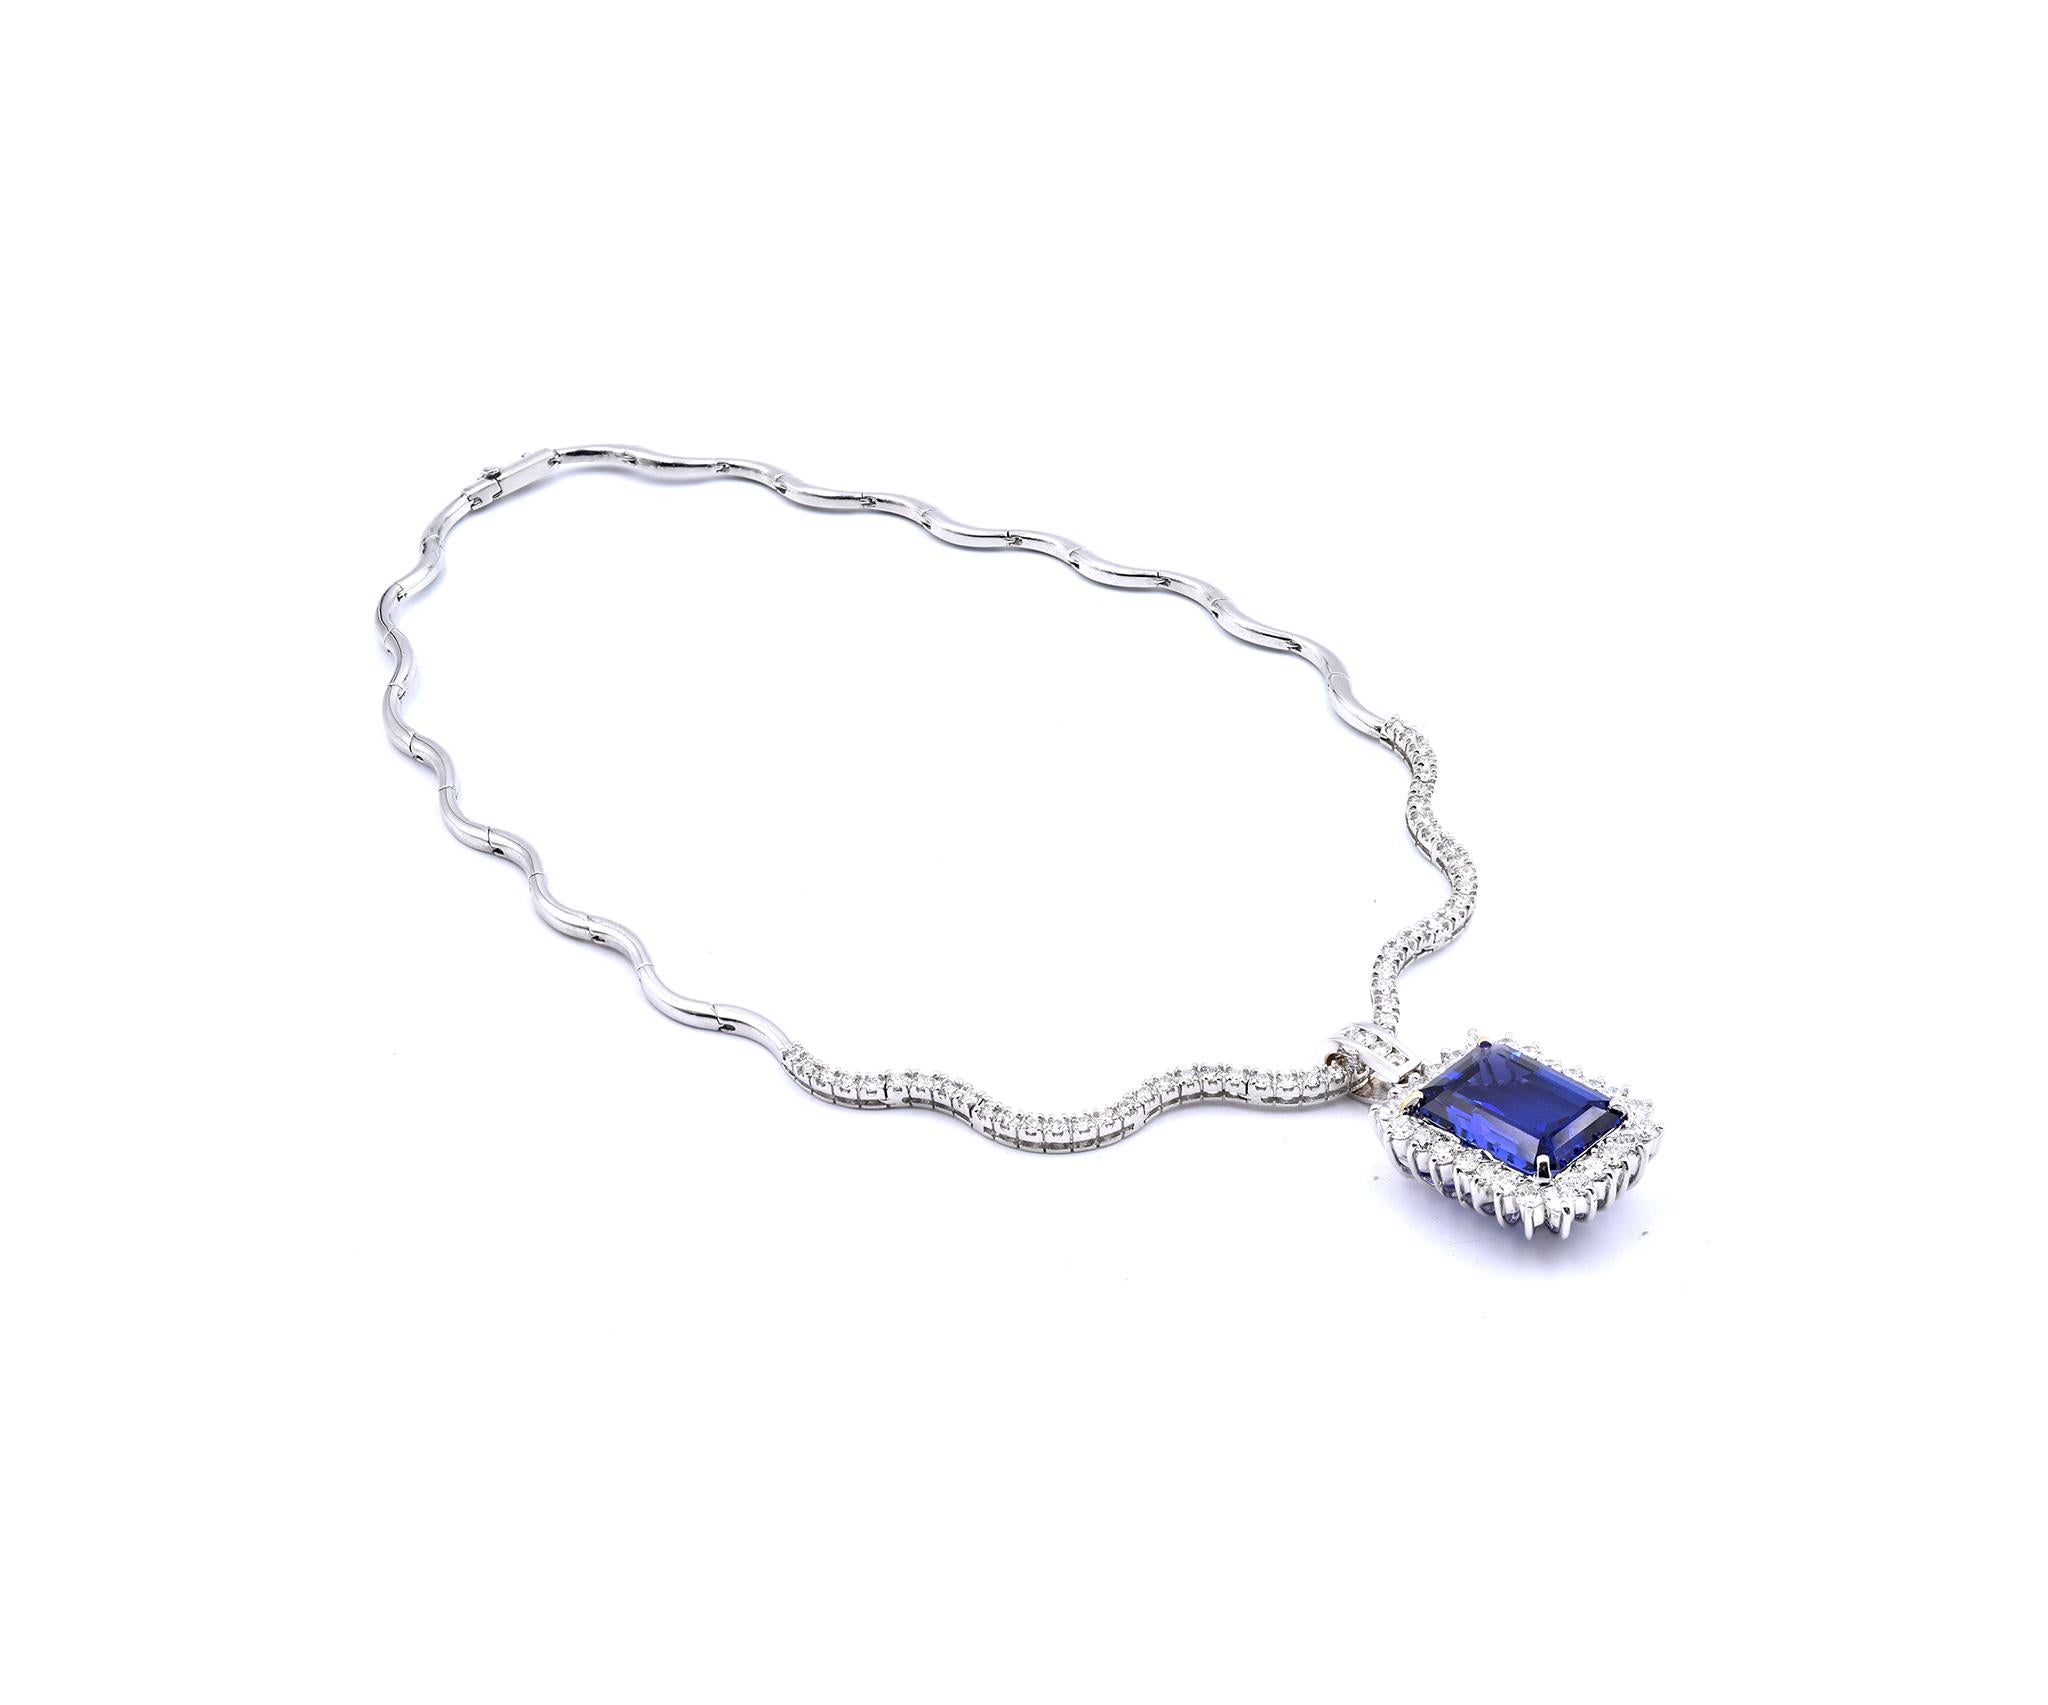 Material: 18K white gold
Tanzanite: 1 emerald cut = 18.73ct
Diamond: 82 round brilliant cut = 6.36cttw
Color: G
Clarity: VS
Dimensions: necklace measures 16-inches
Weight: 37.54 grams